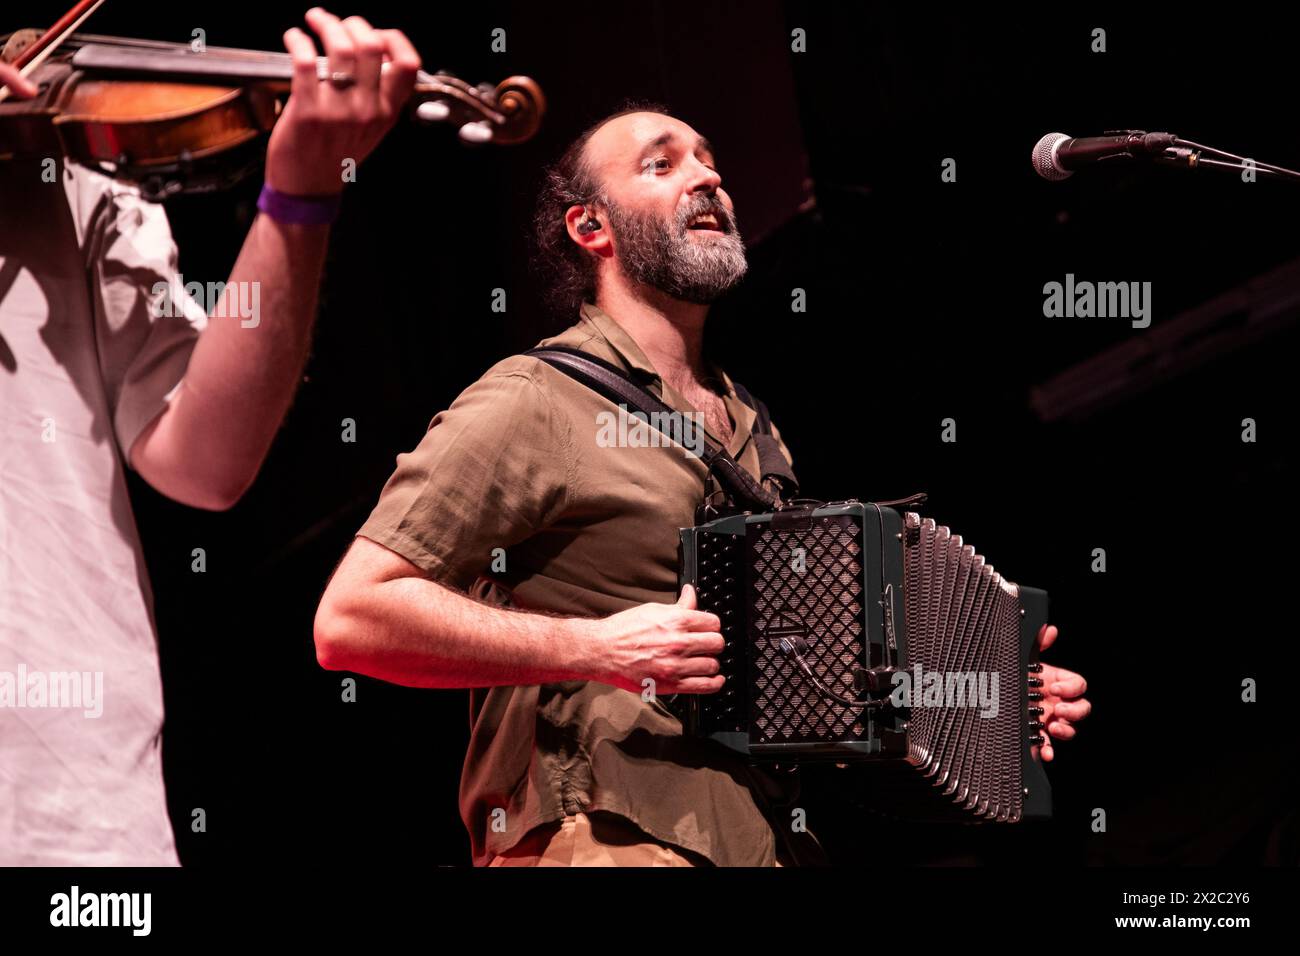 Barcelona, Spain. 2024.04.20. El Diluvi band last perform on stage at Tradicionarius on April 20, 2024 in Barcelona, Spain. Stock Photo